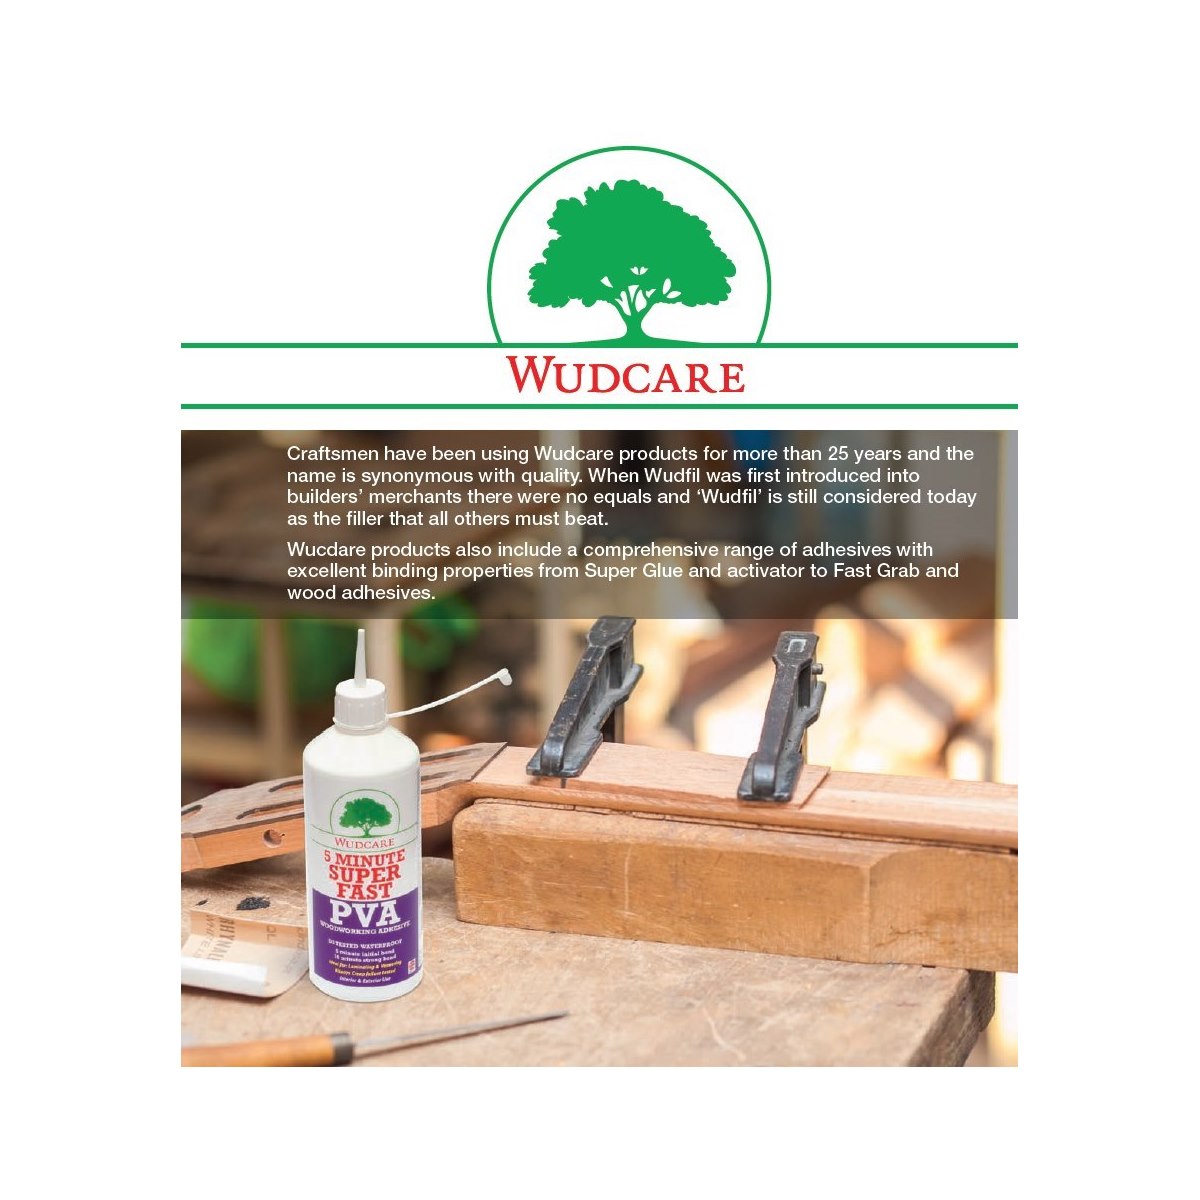 Where to buy Wudcare Glues